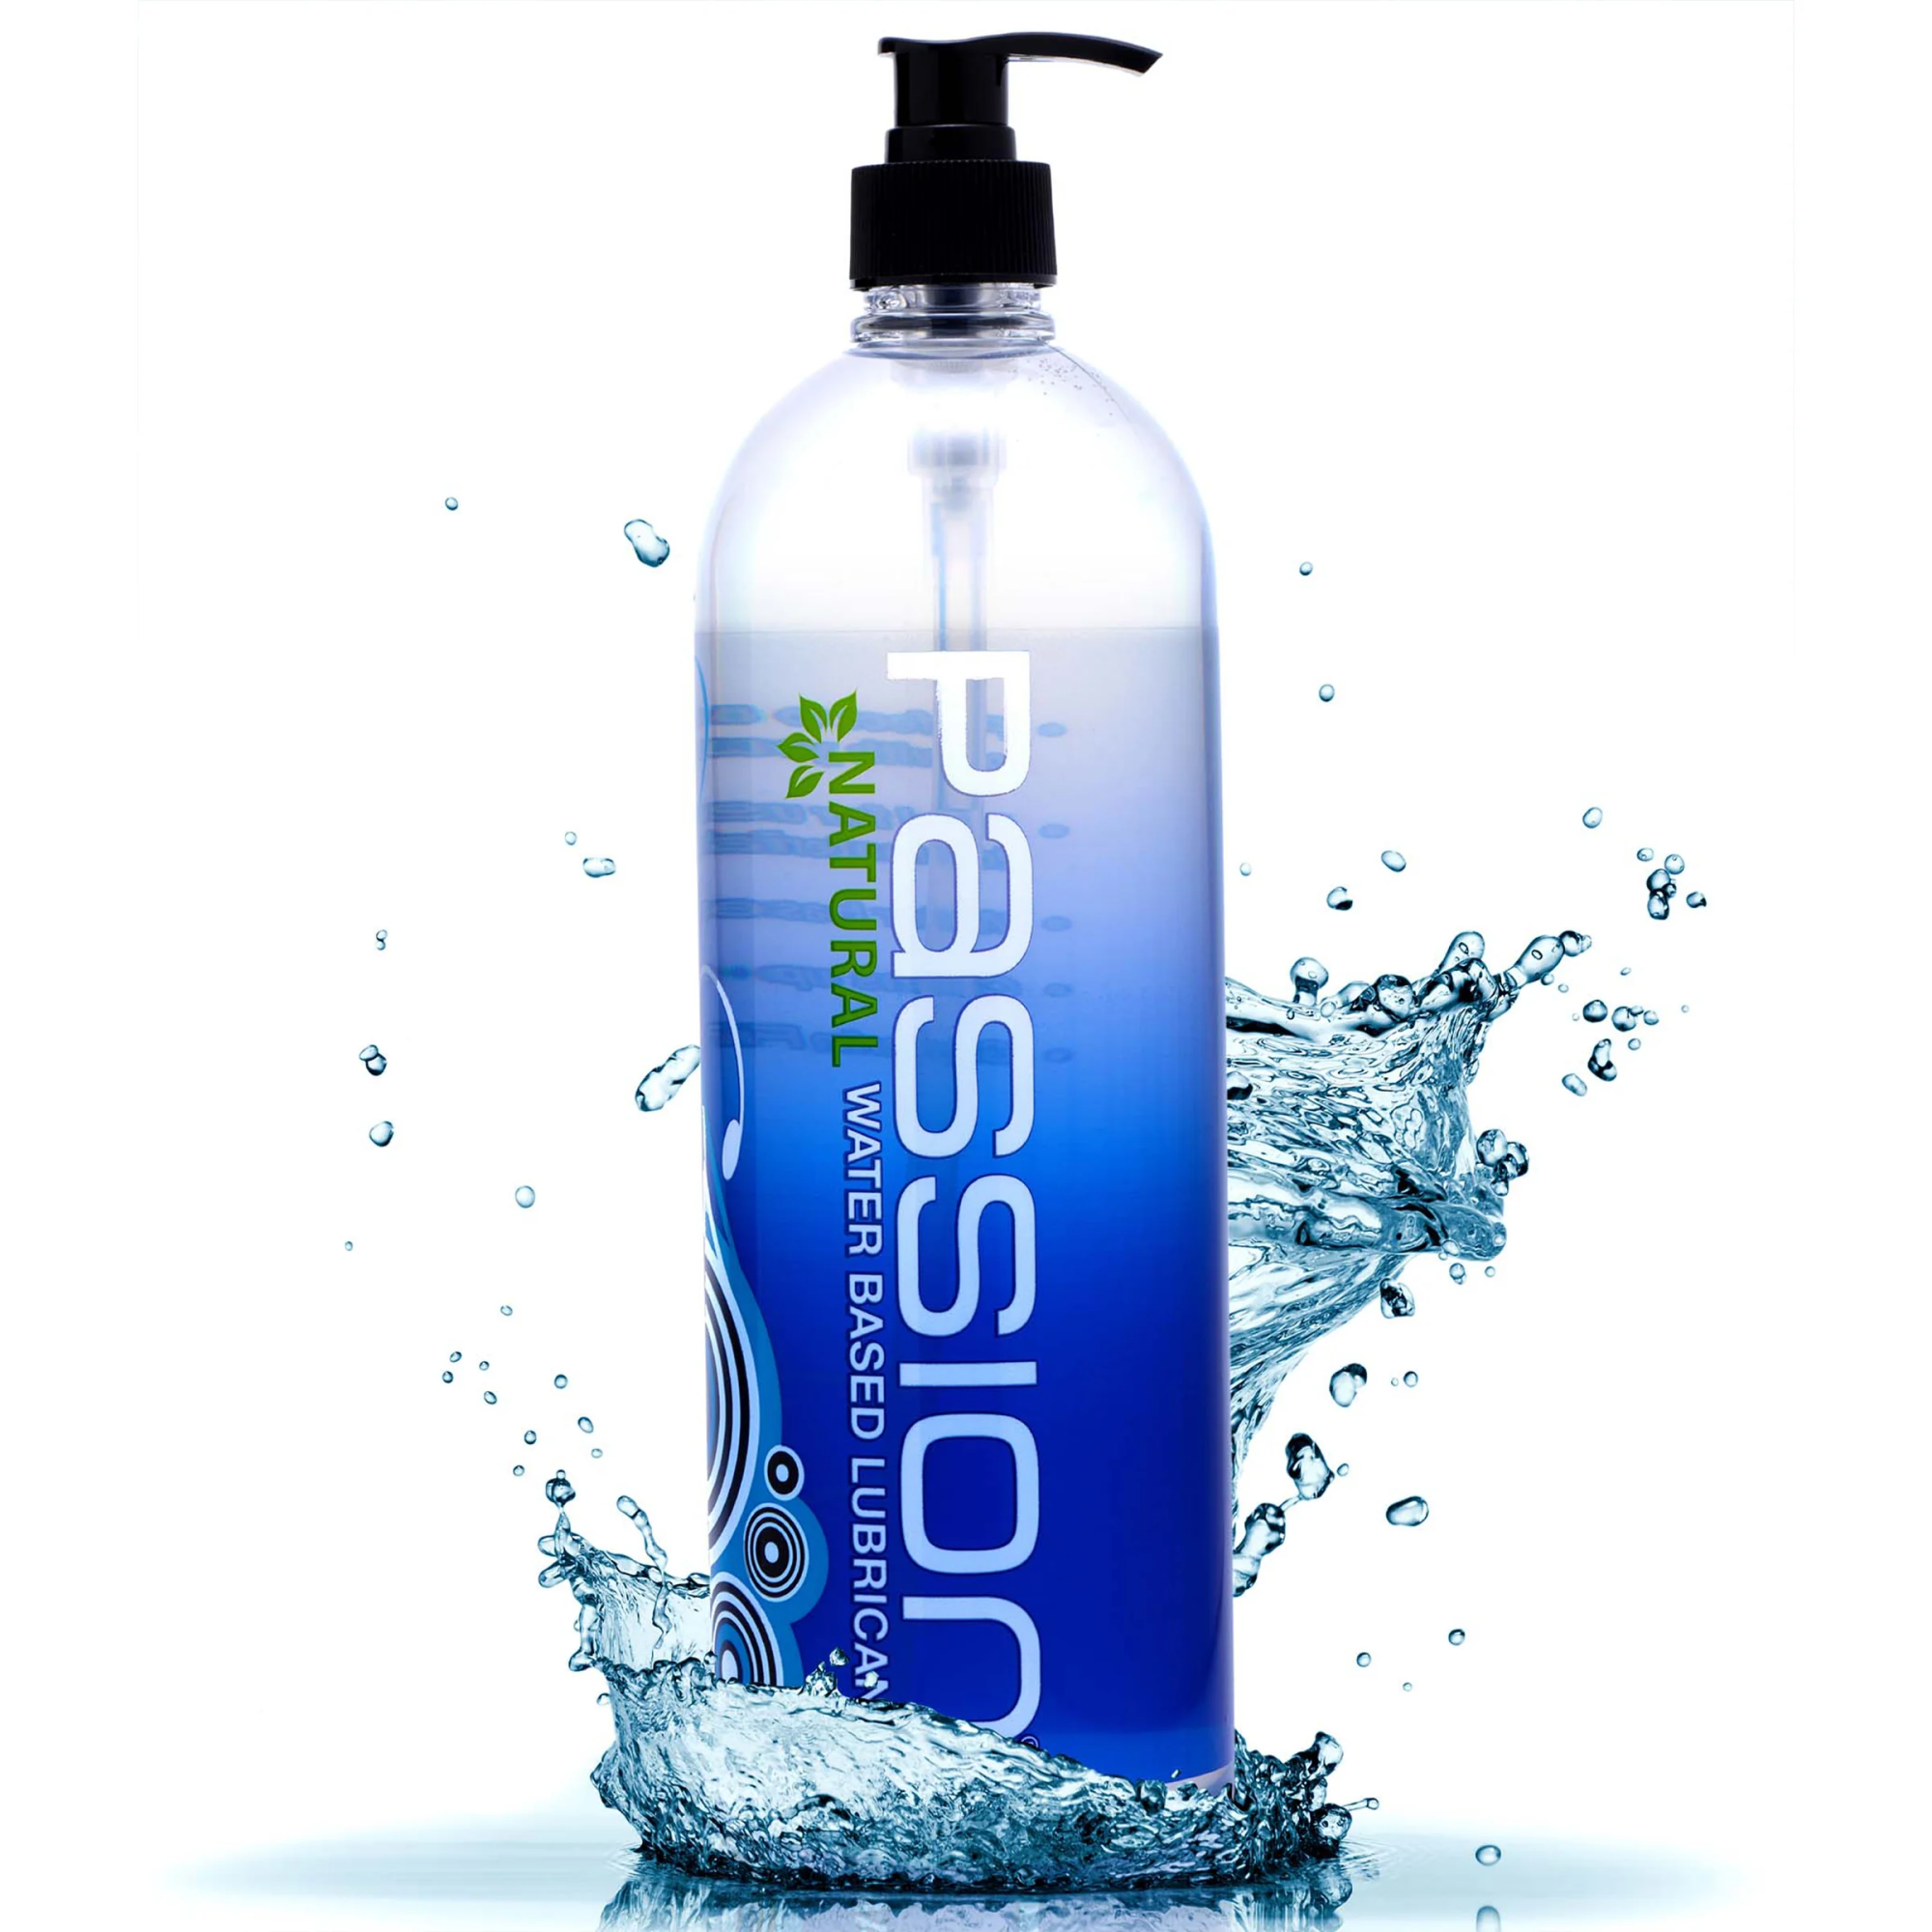 Passion Natural Water-Based Lubricant - лубрикант на водной основе, 1 л